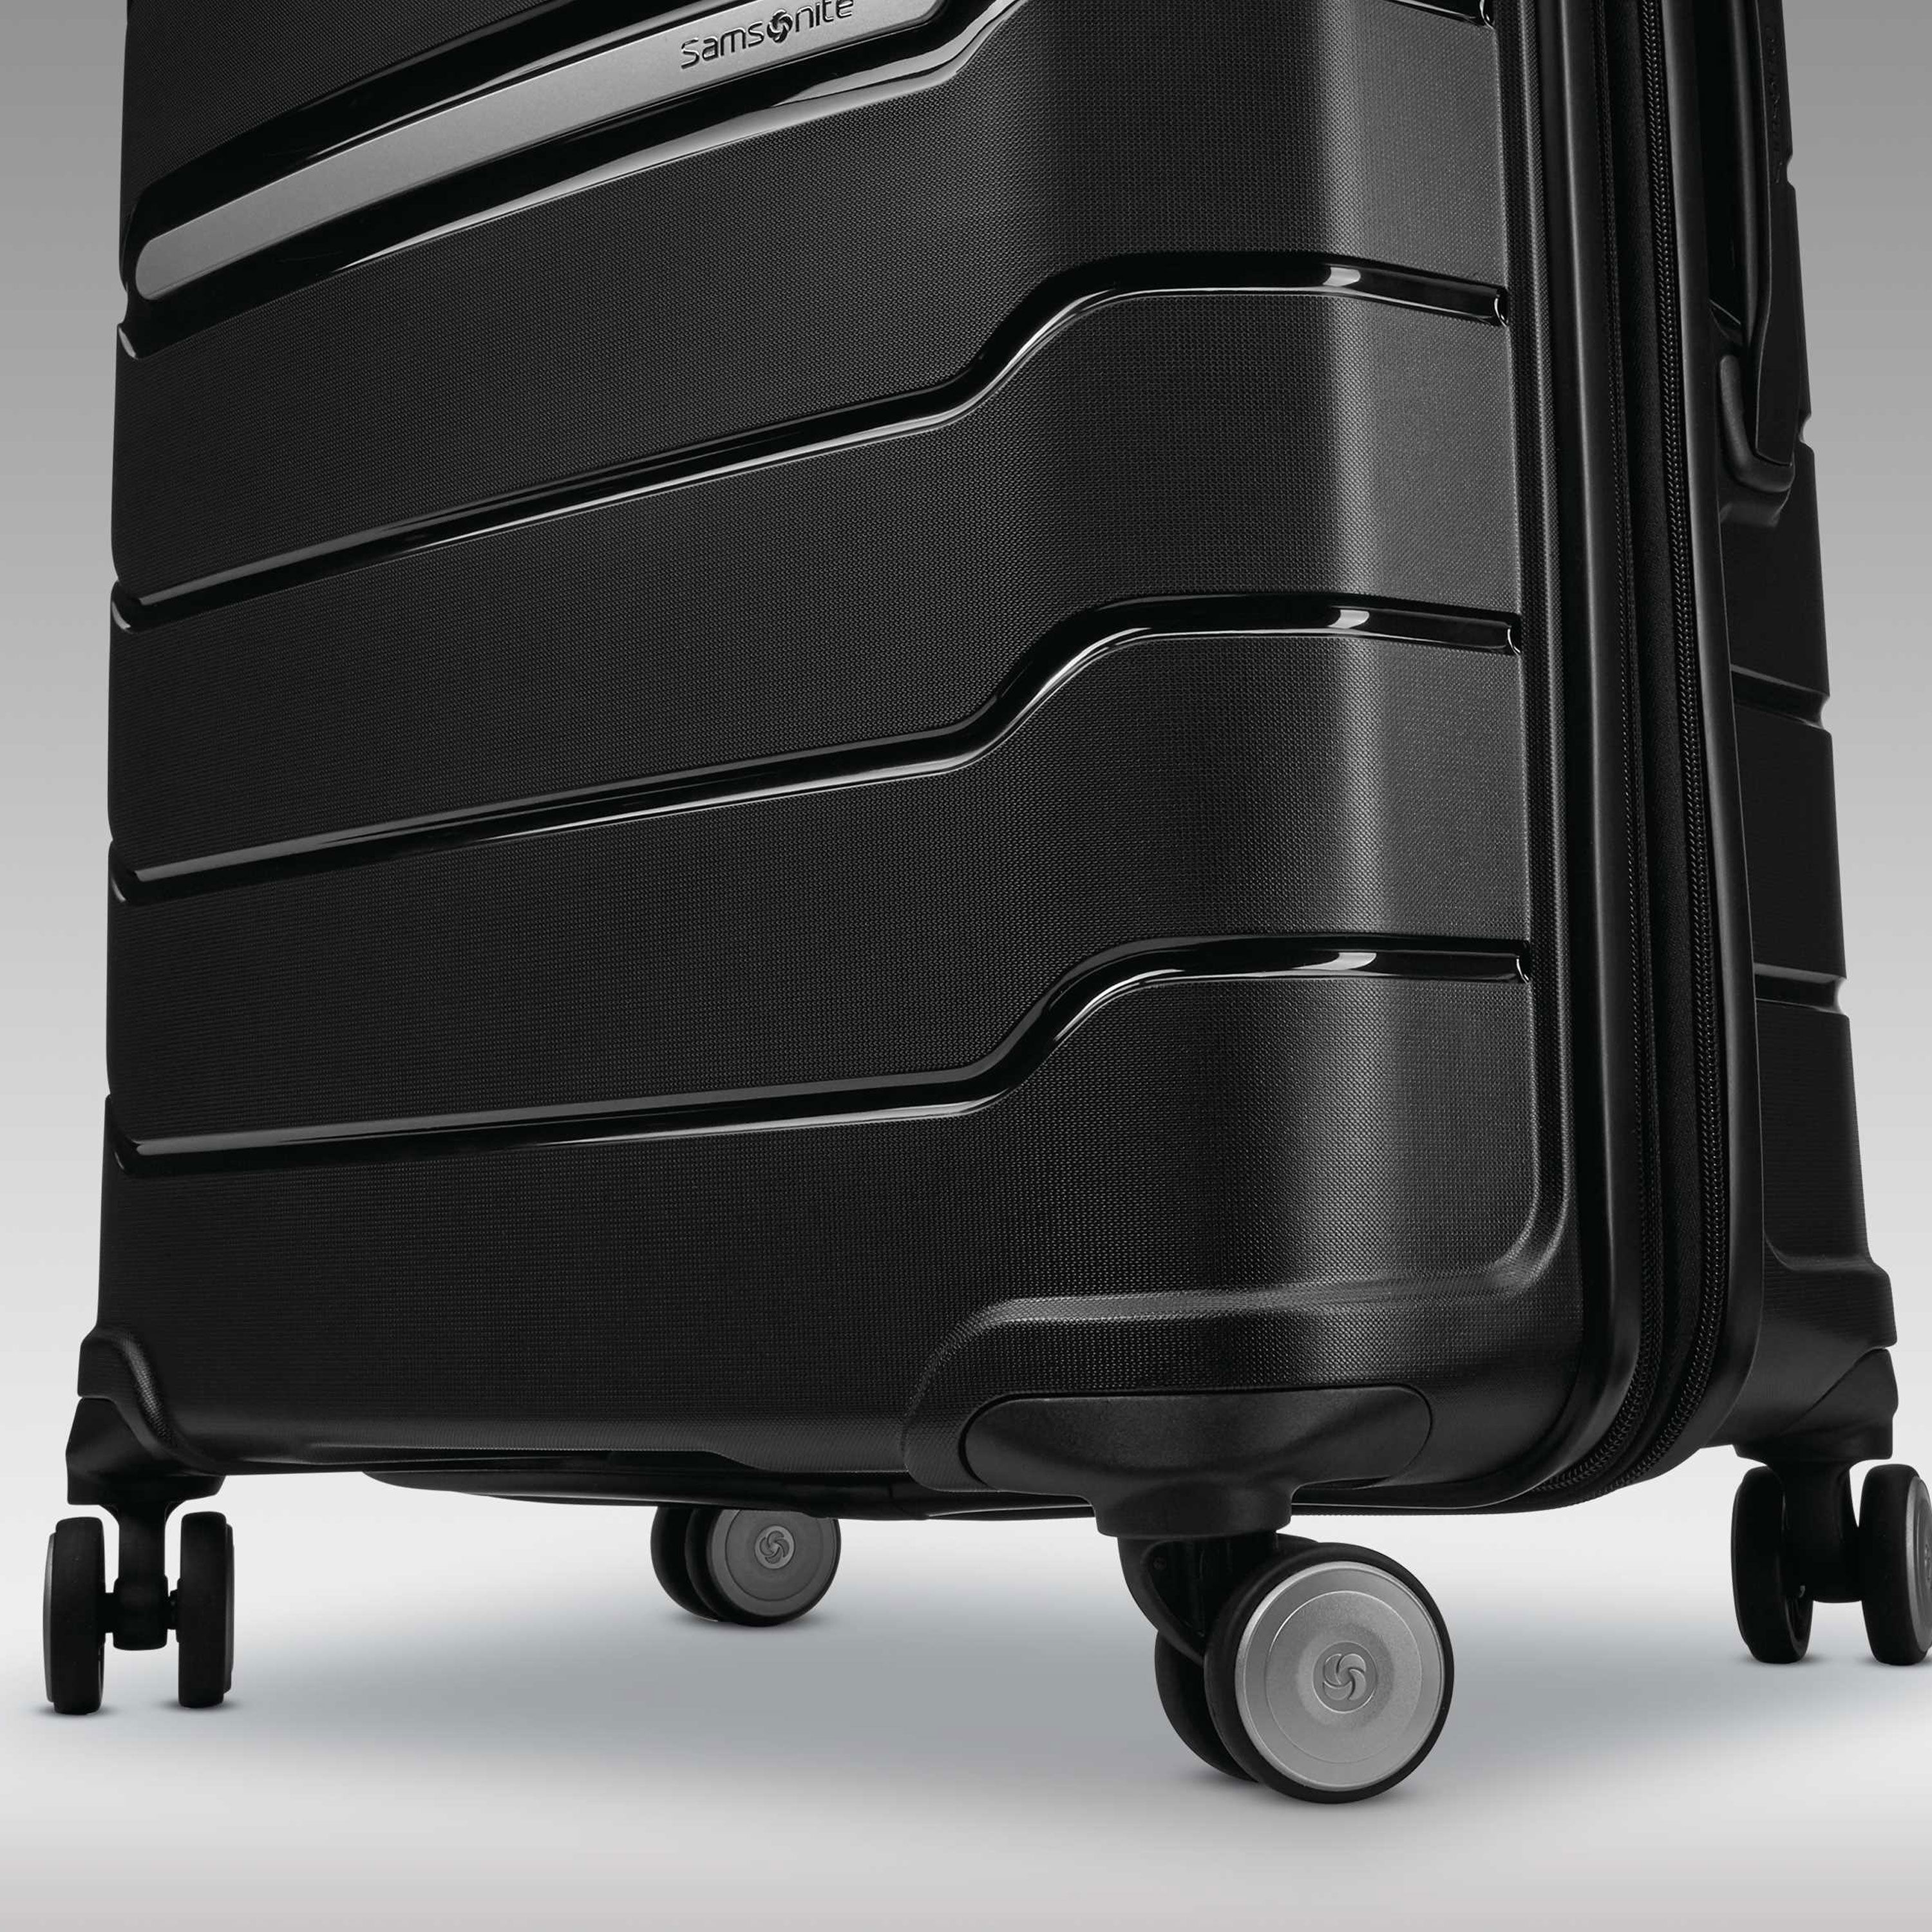 How to Set Lock Code on Samsonite S'cure Suitcase - YouTube